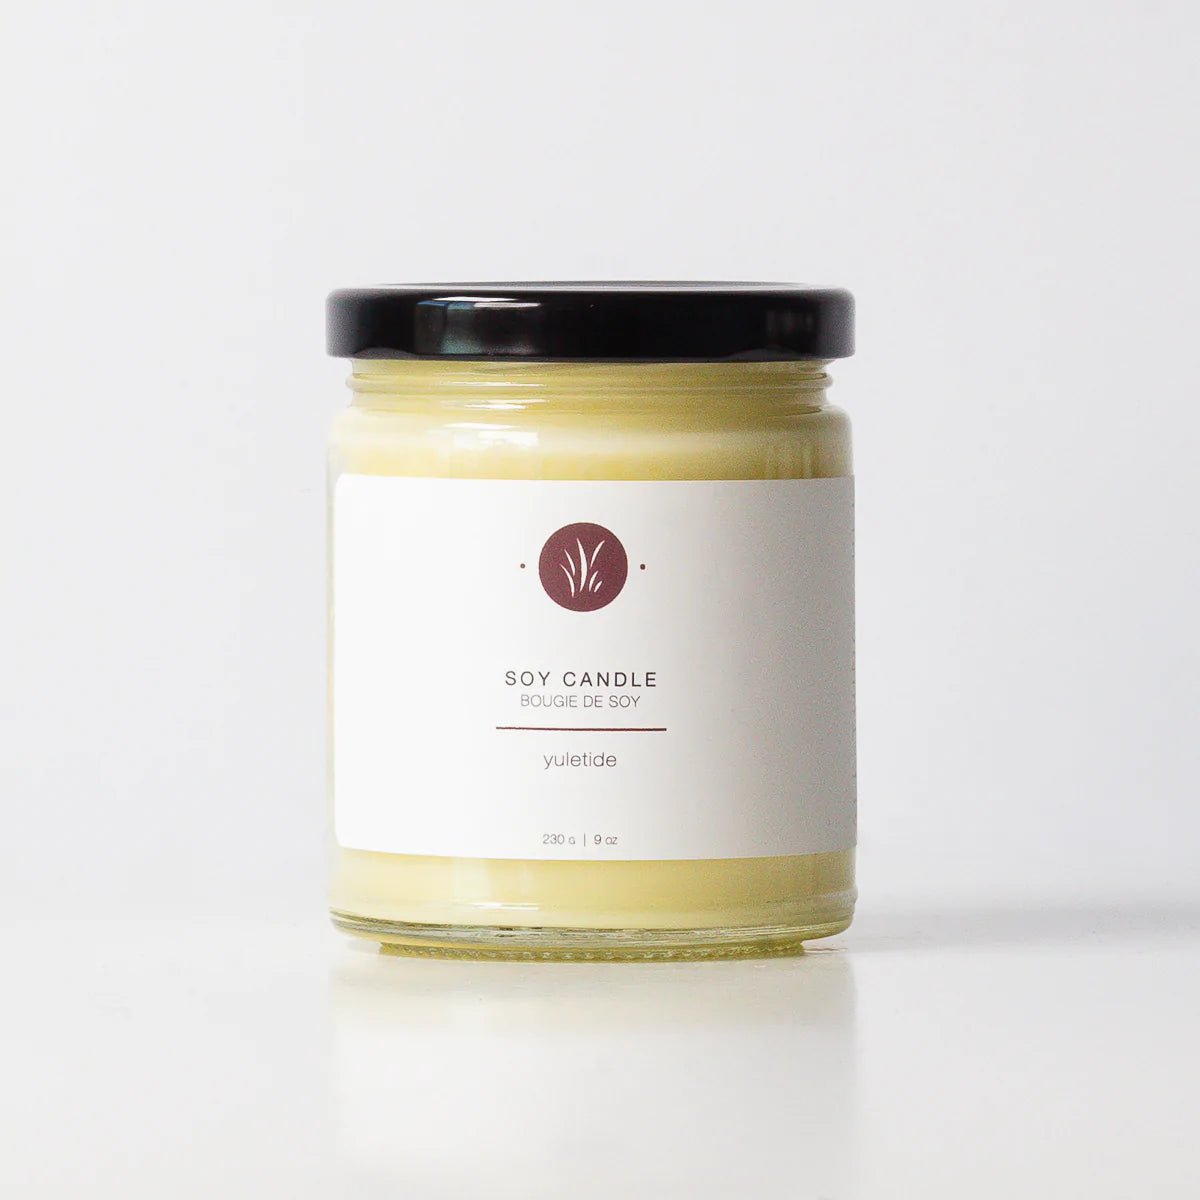 Yuletide Soy Candle by All Things Jill, 240g